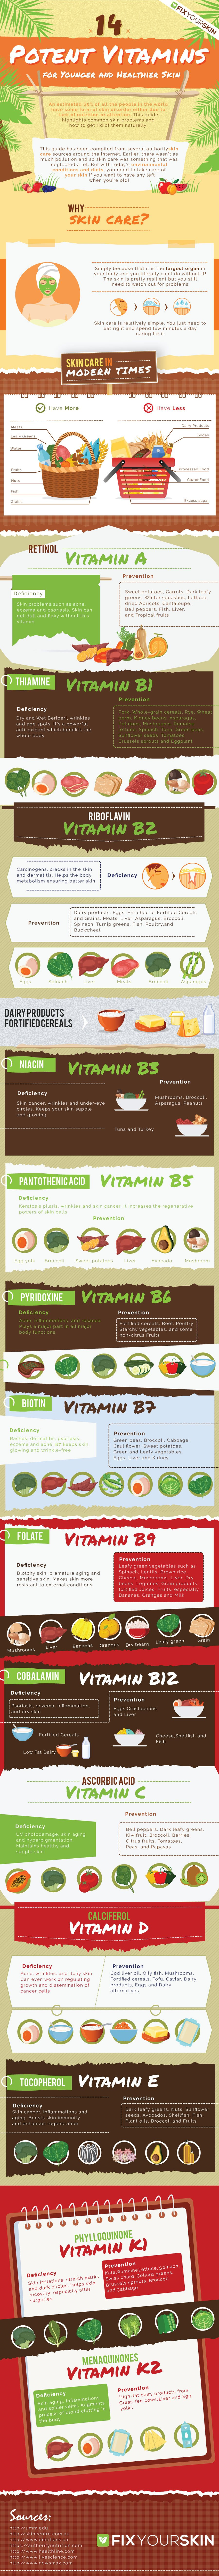 The Benefits of Vitamins for Healthy Skin